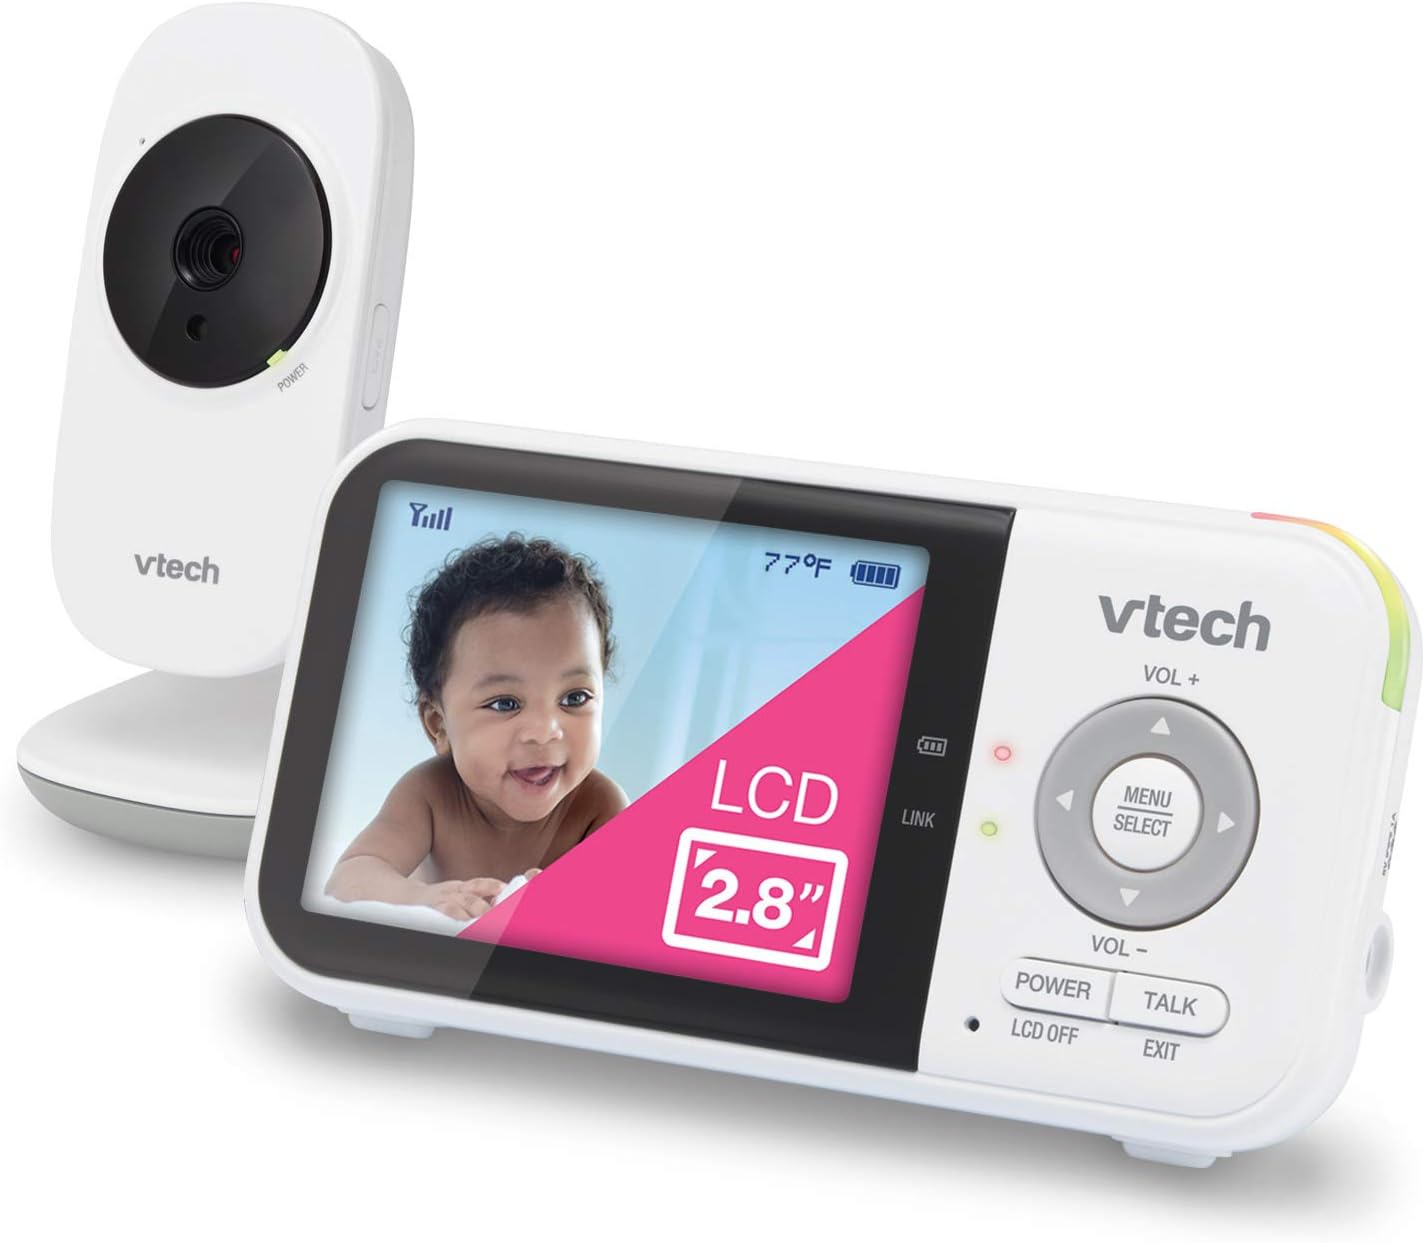 VTech VM819 Video Baby Monitor with 19 Hour Battery [...]